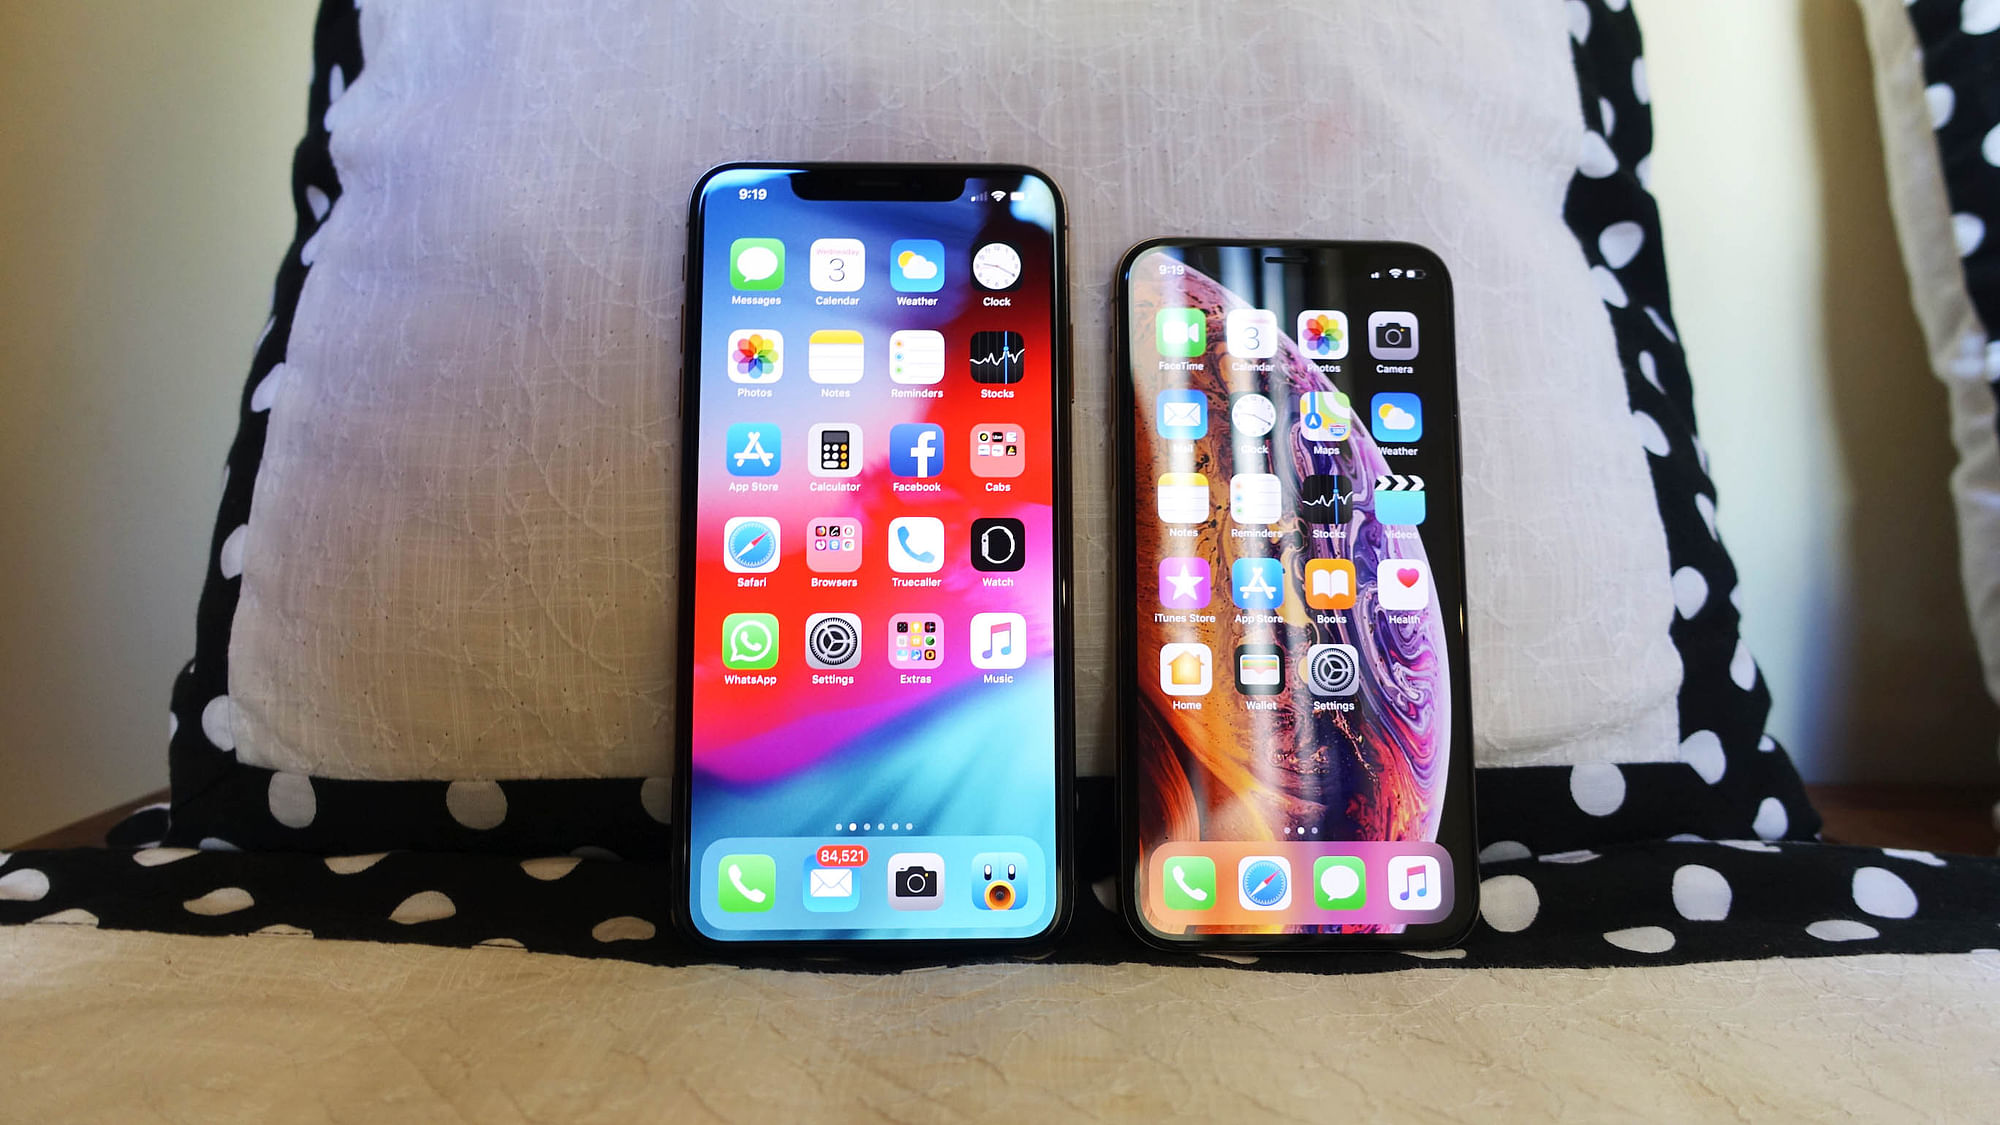 The iPhone XS Max (left) &amp; iPhone X (right).